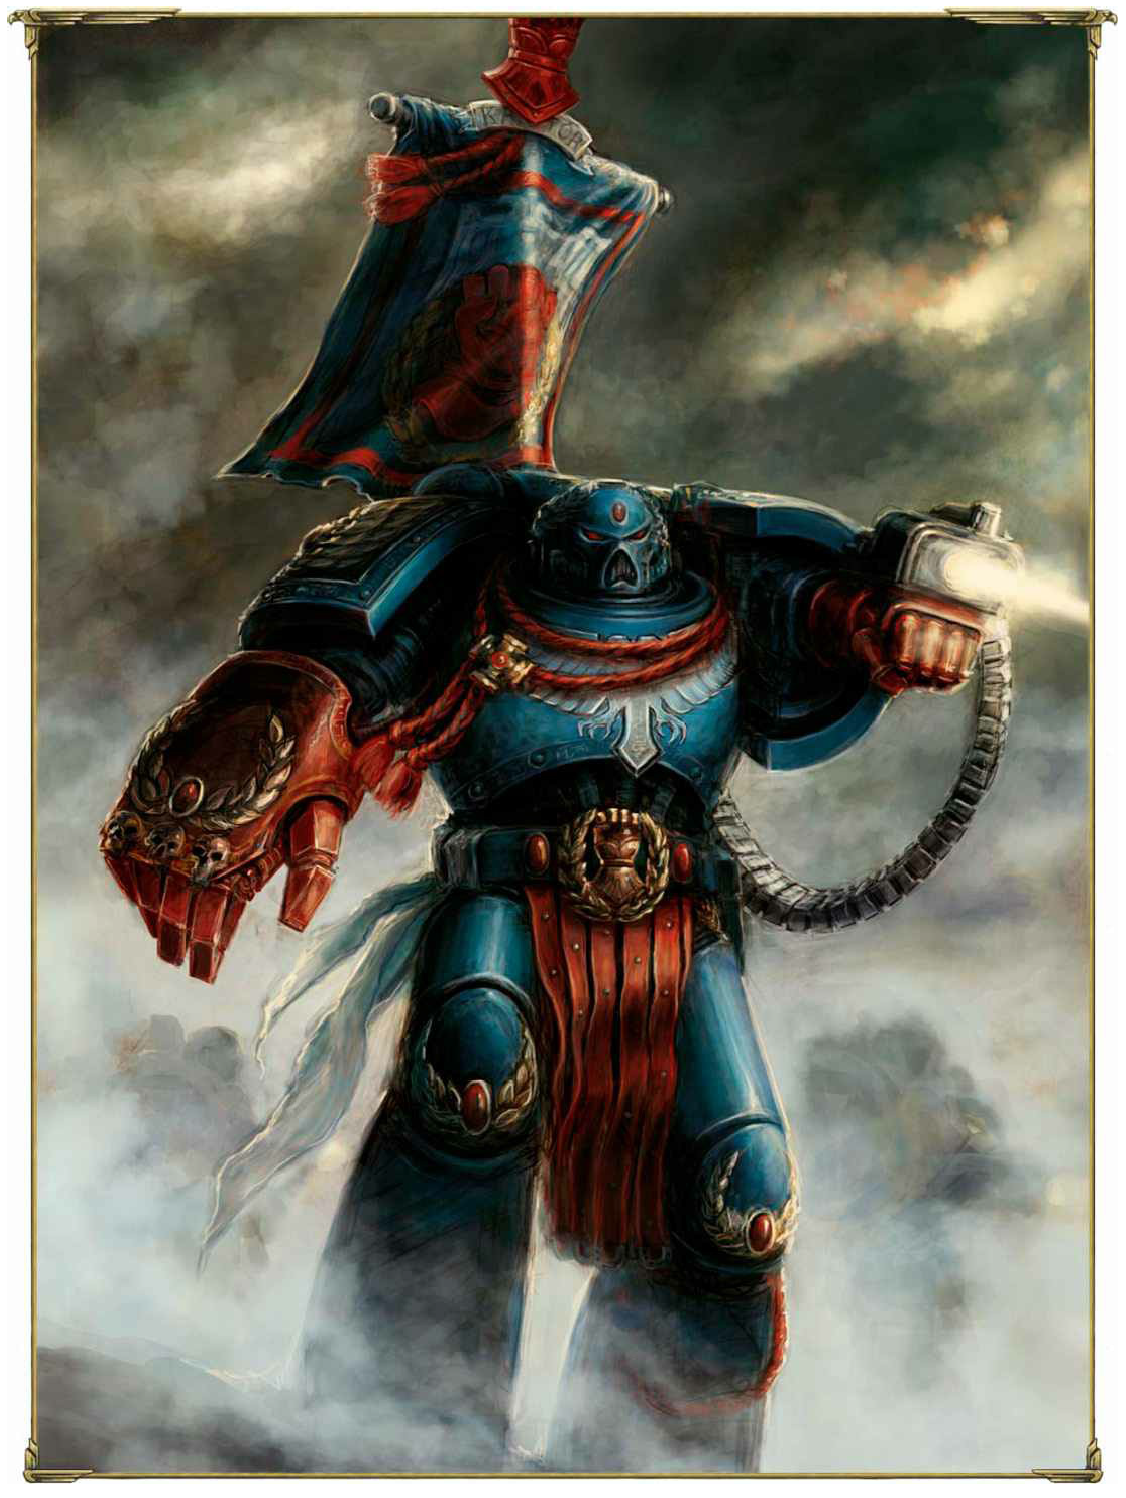 Pedro Kantor: The Chapter Master of the Crimson Fists in Warhammer 40k